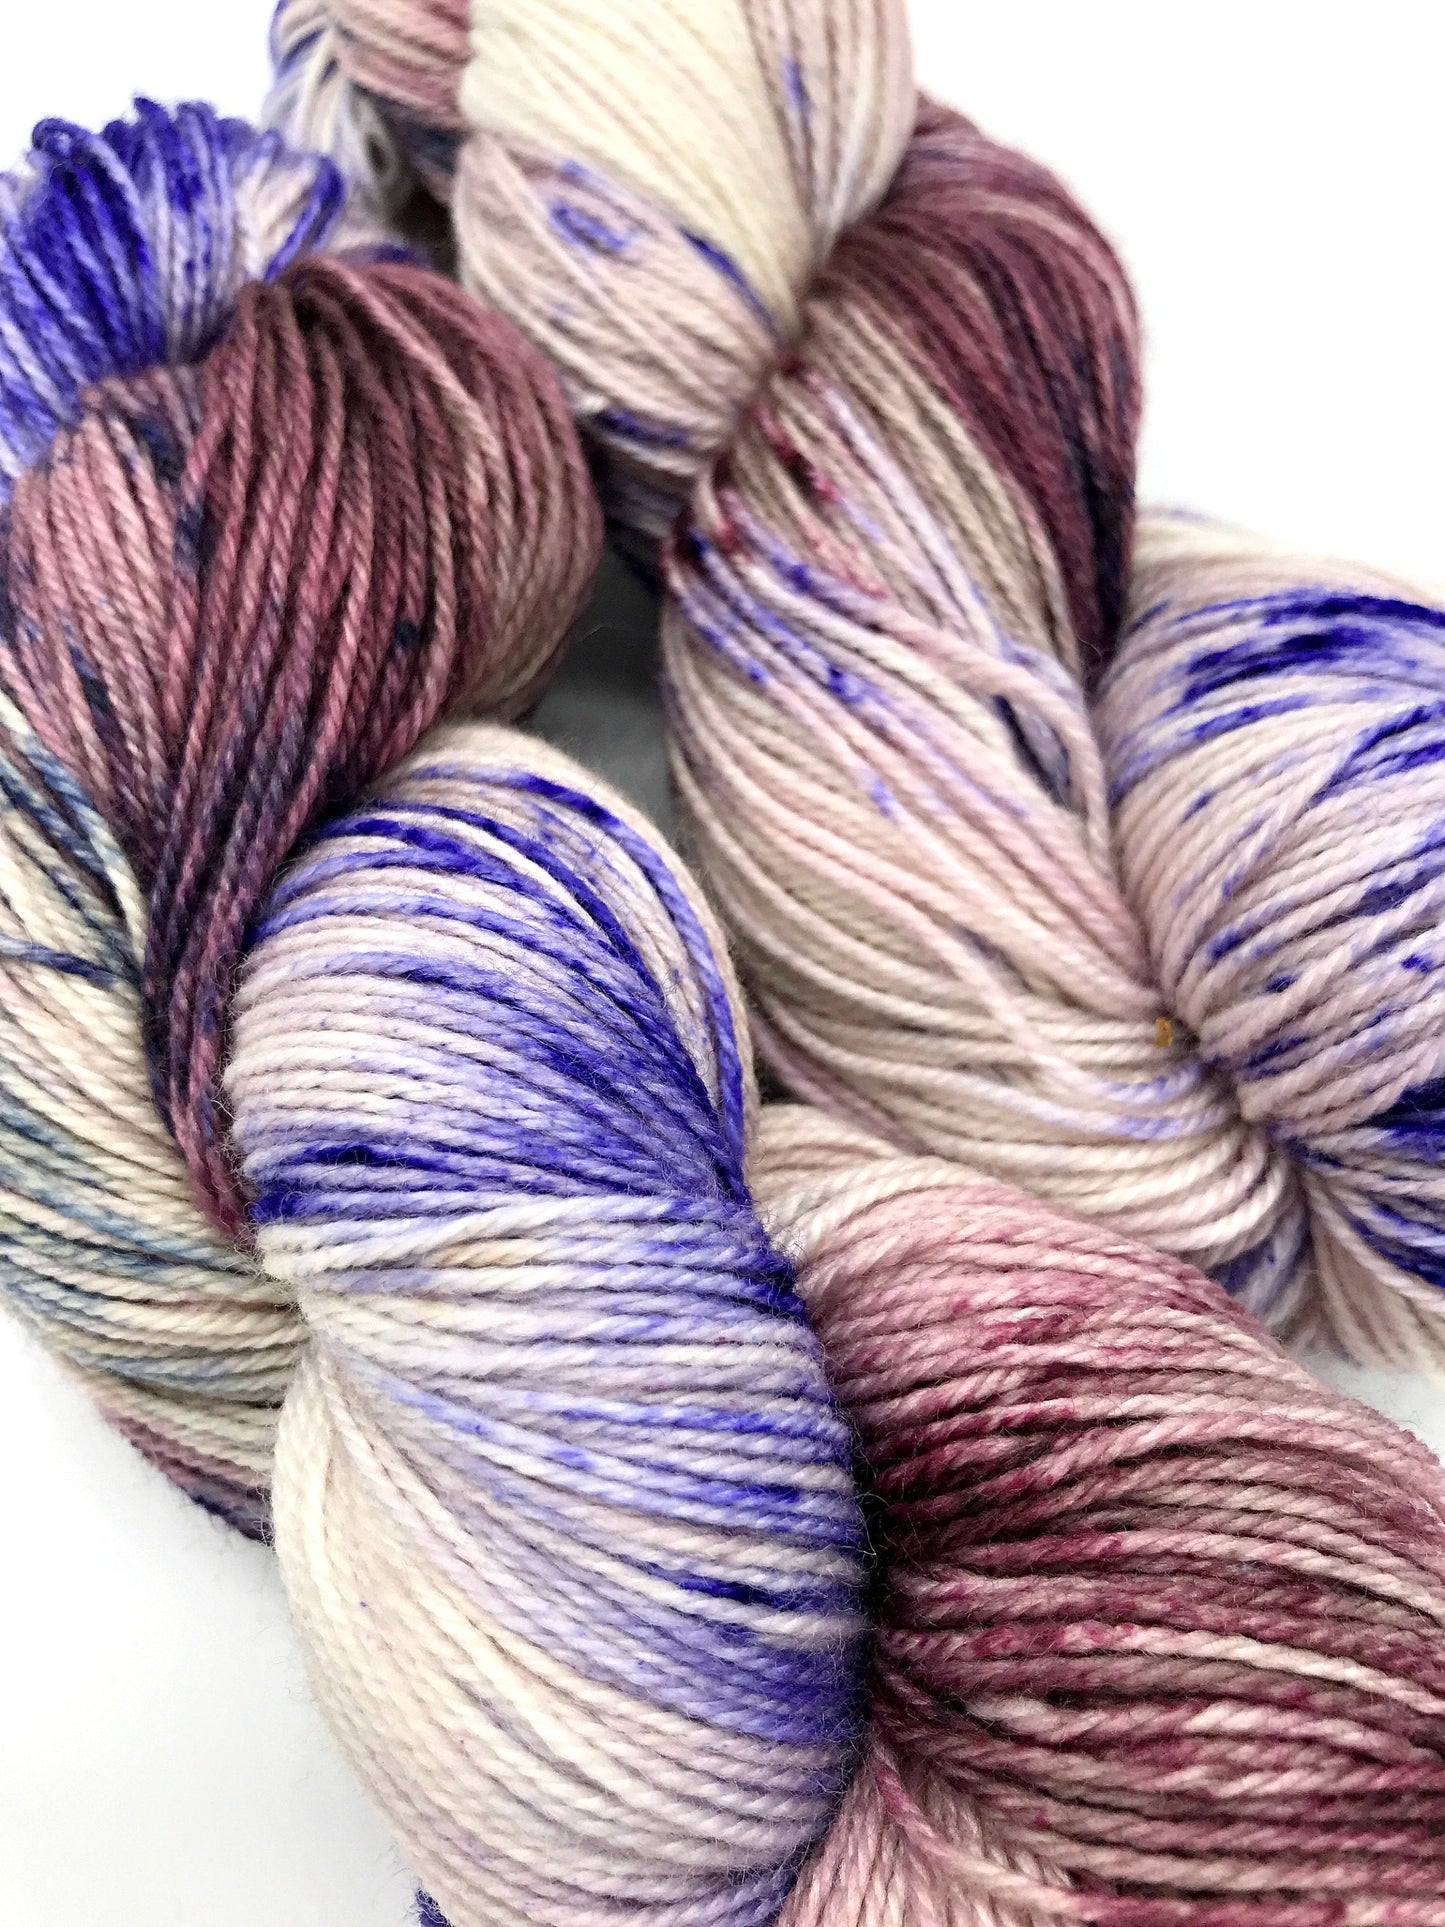 Stompin' in the Berry Patch - Fingering 3 Ply - Okanagan Dye Works